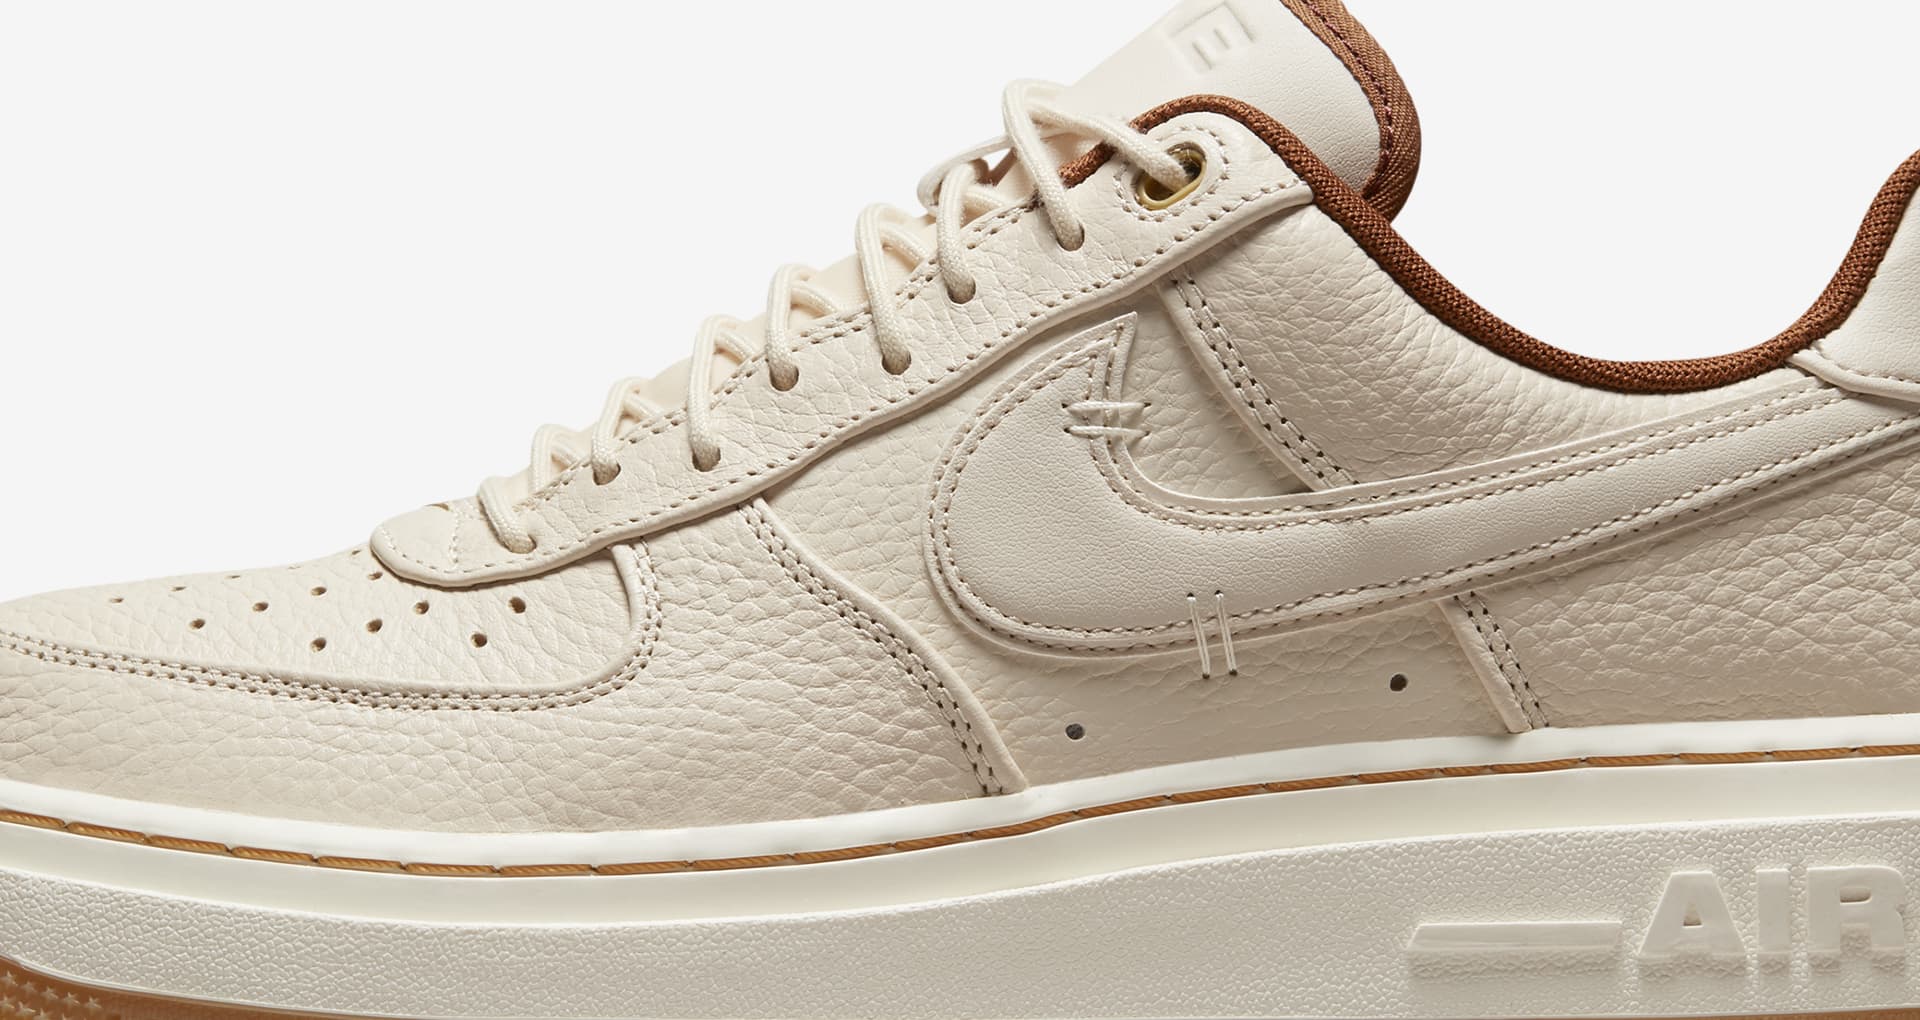 【NIKE公式】エア フォース 1 ラックス 'Pearl White' (DB4109-200 / AF 1 LUXE). Nike